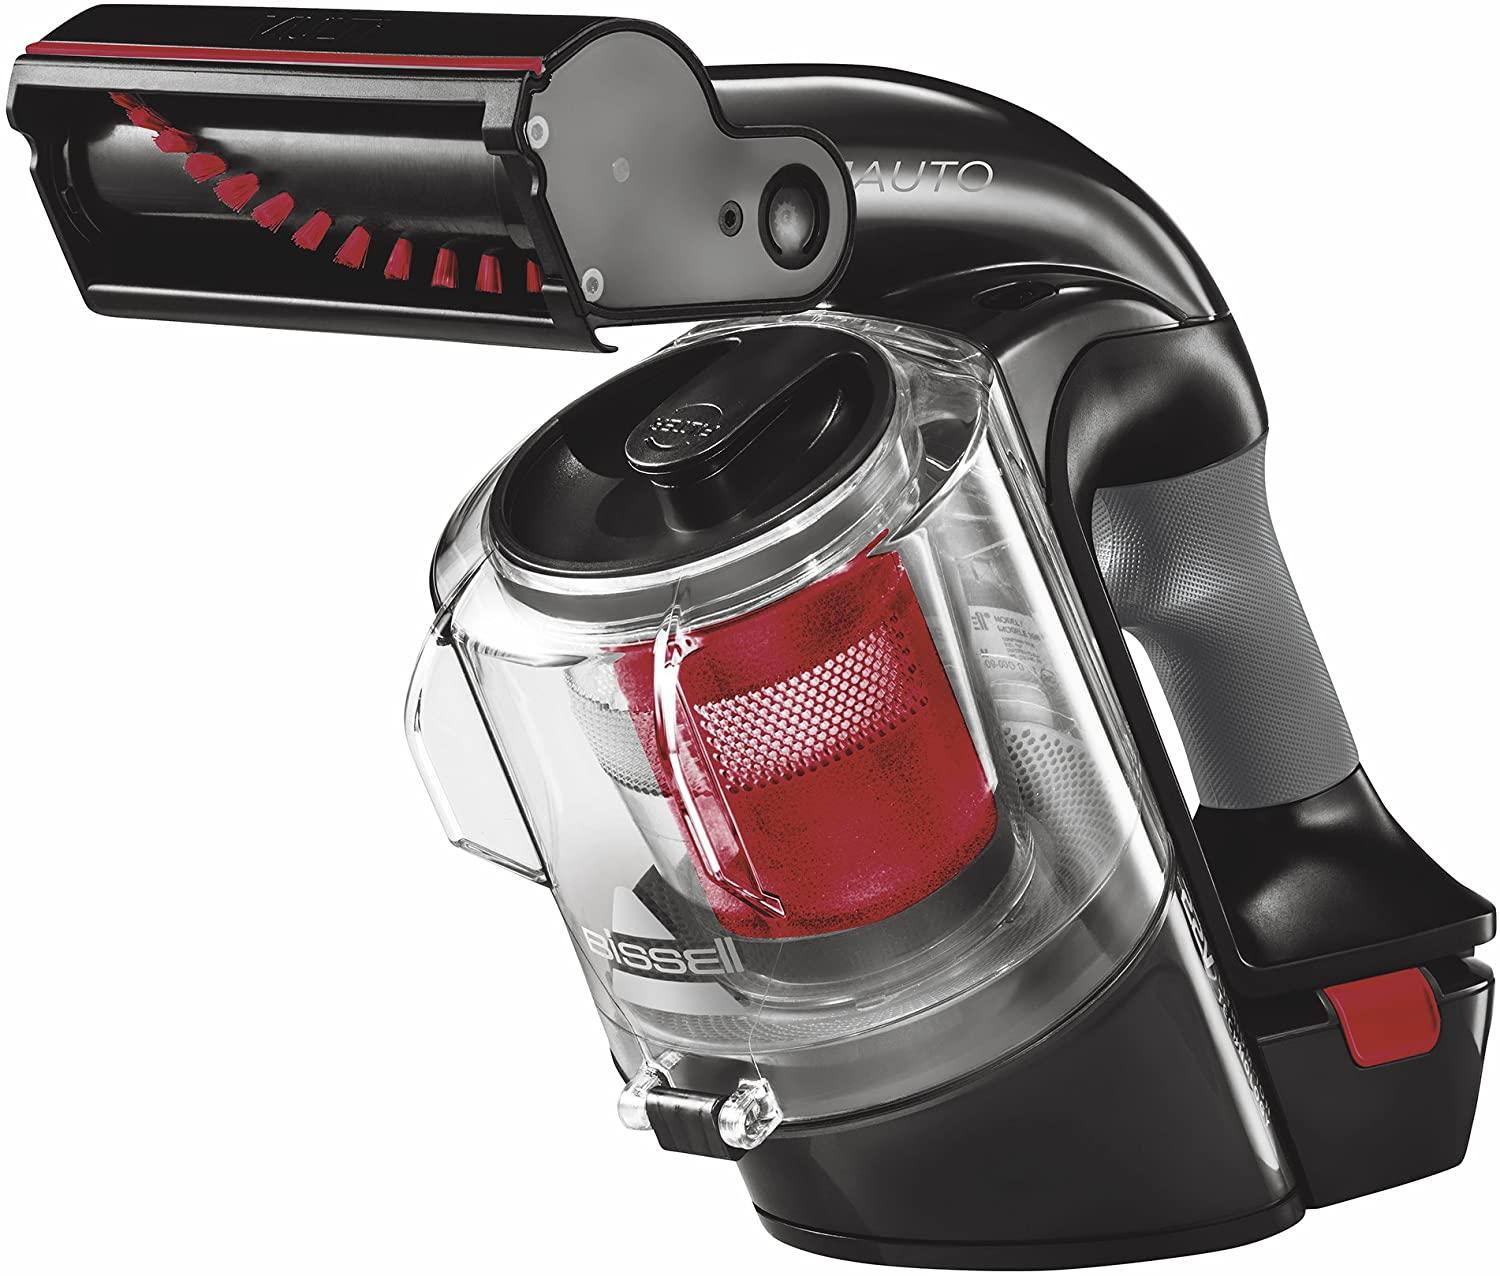 BISSELL cordless vacuum cleaner